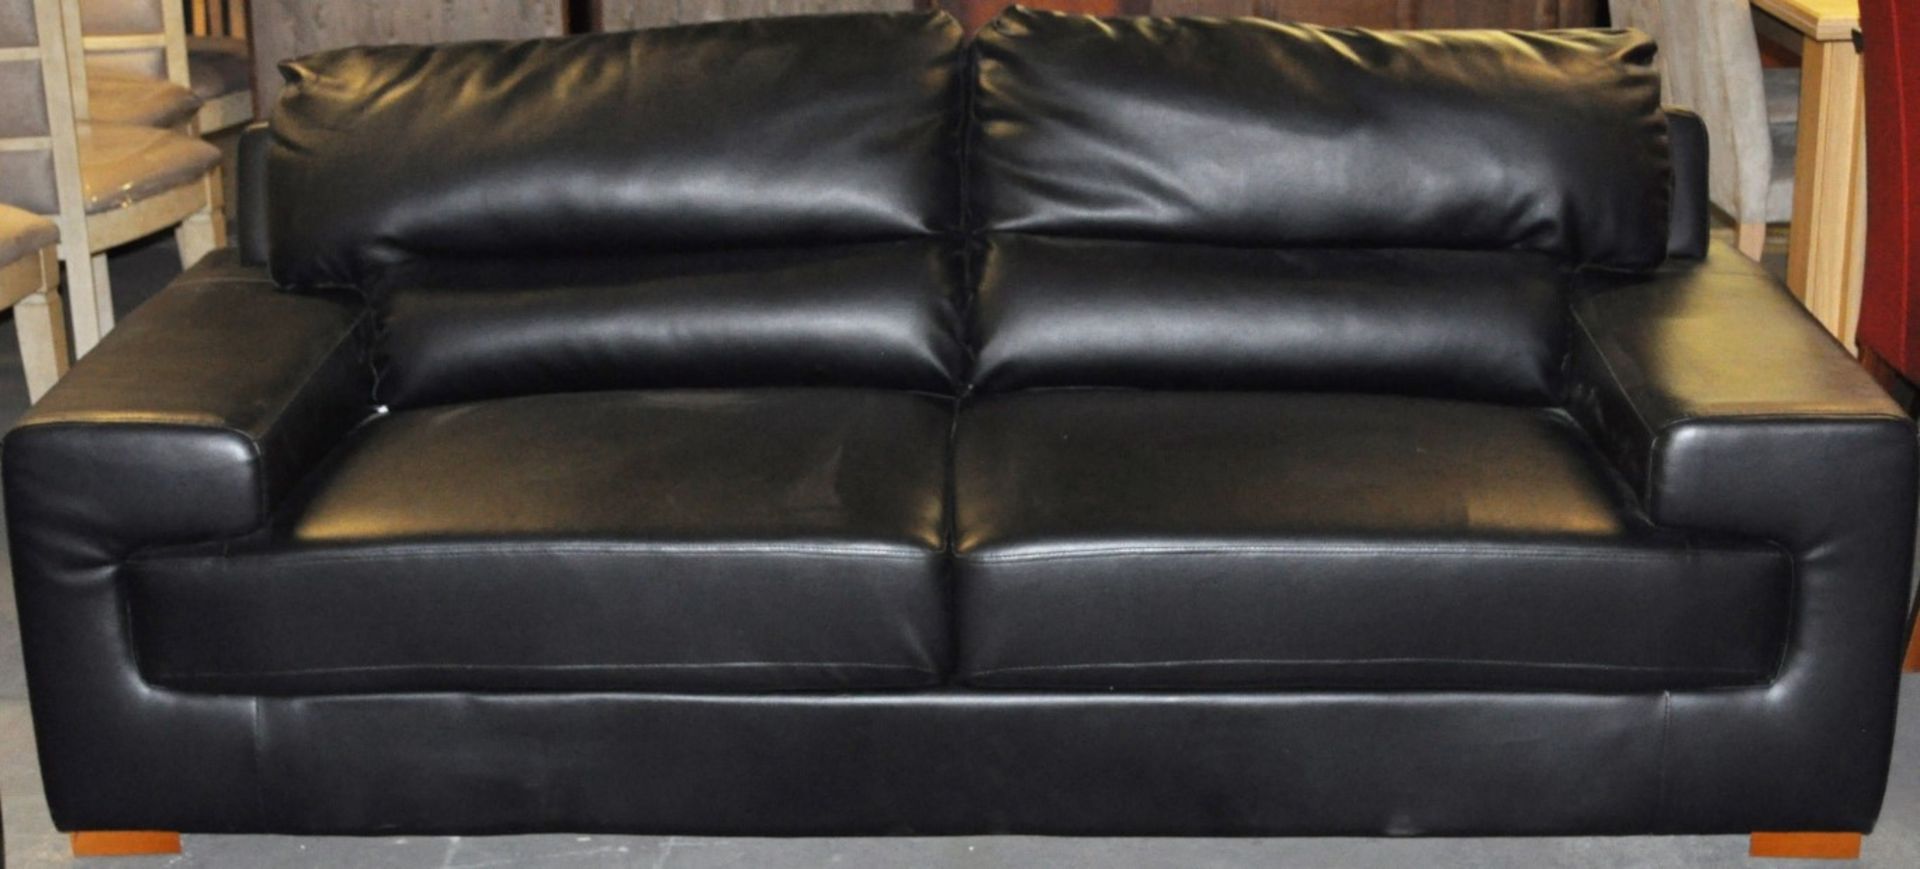 1 x Black 3 & 2 Seater Sofa Harry Suite Designed by Mark Webster – Ref : CH151 - Arms Fold Over - Image 4 of 6